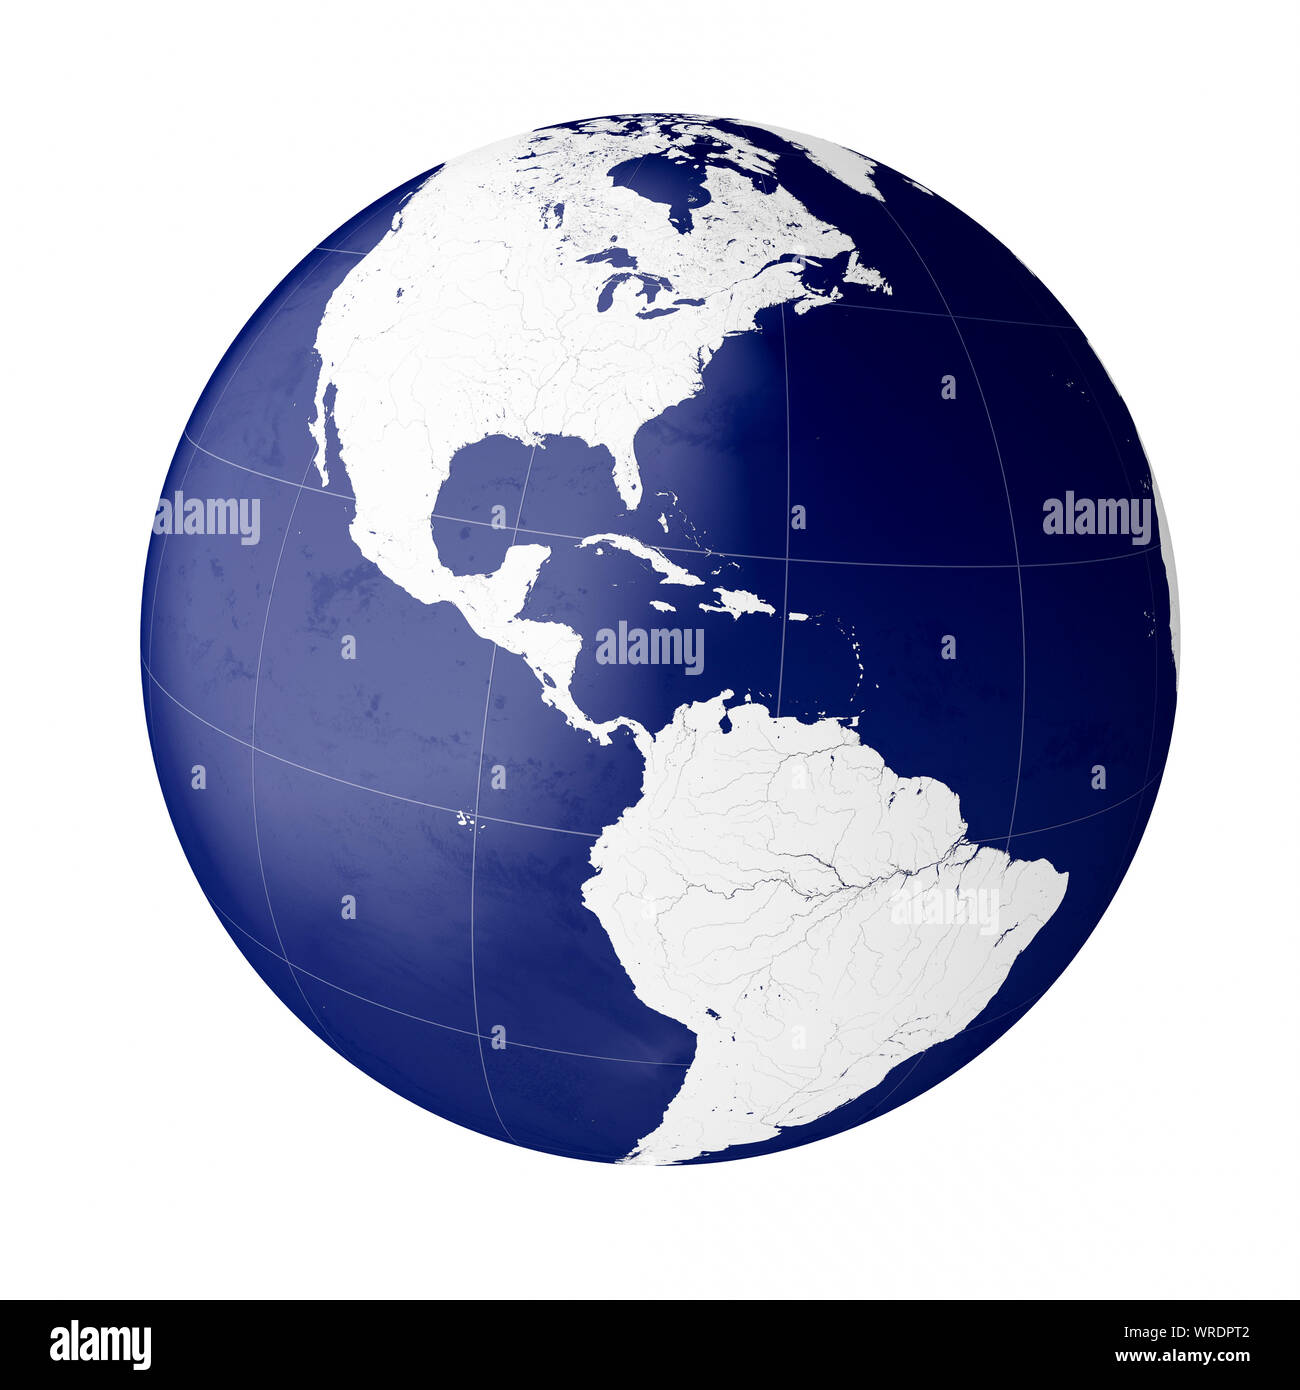 Globe showing the Americas (continents of North America and South America) on planet Earth Stock Photo